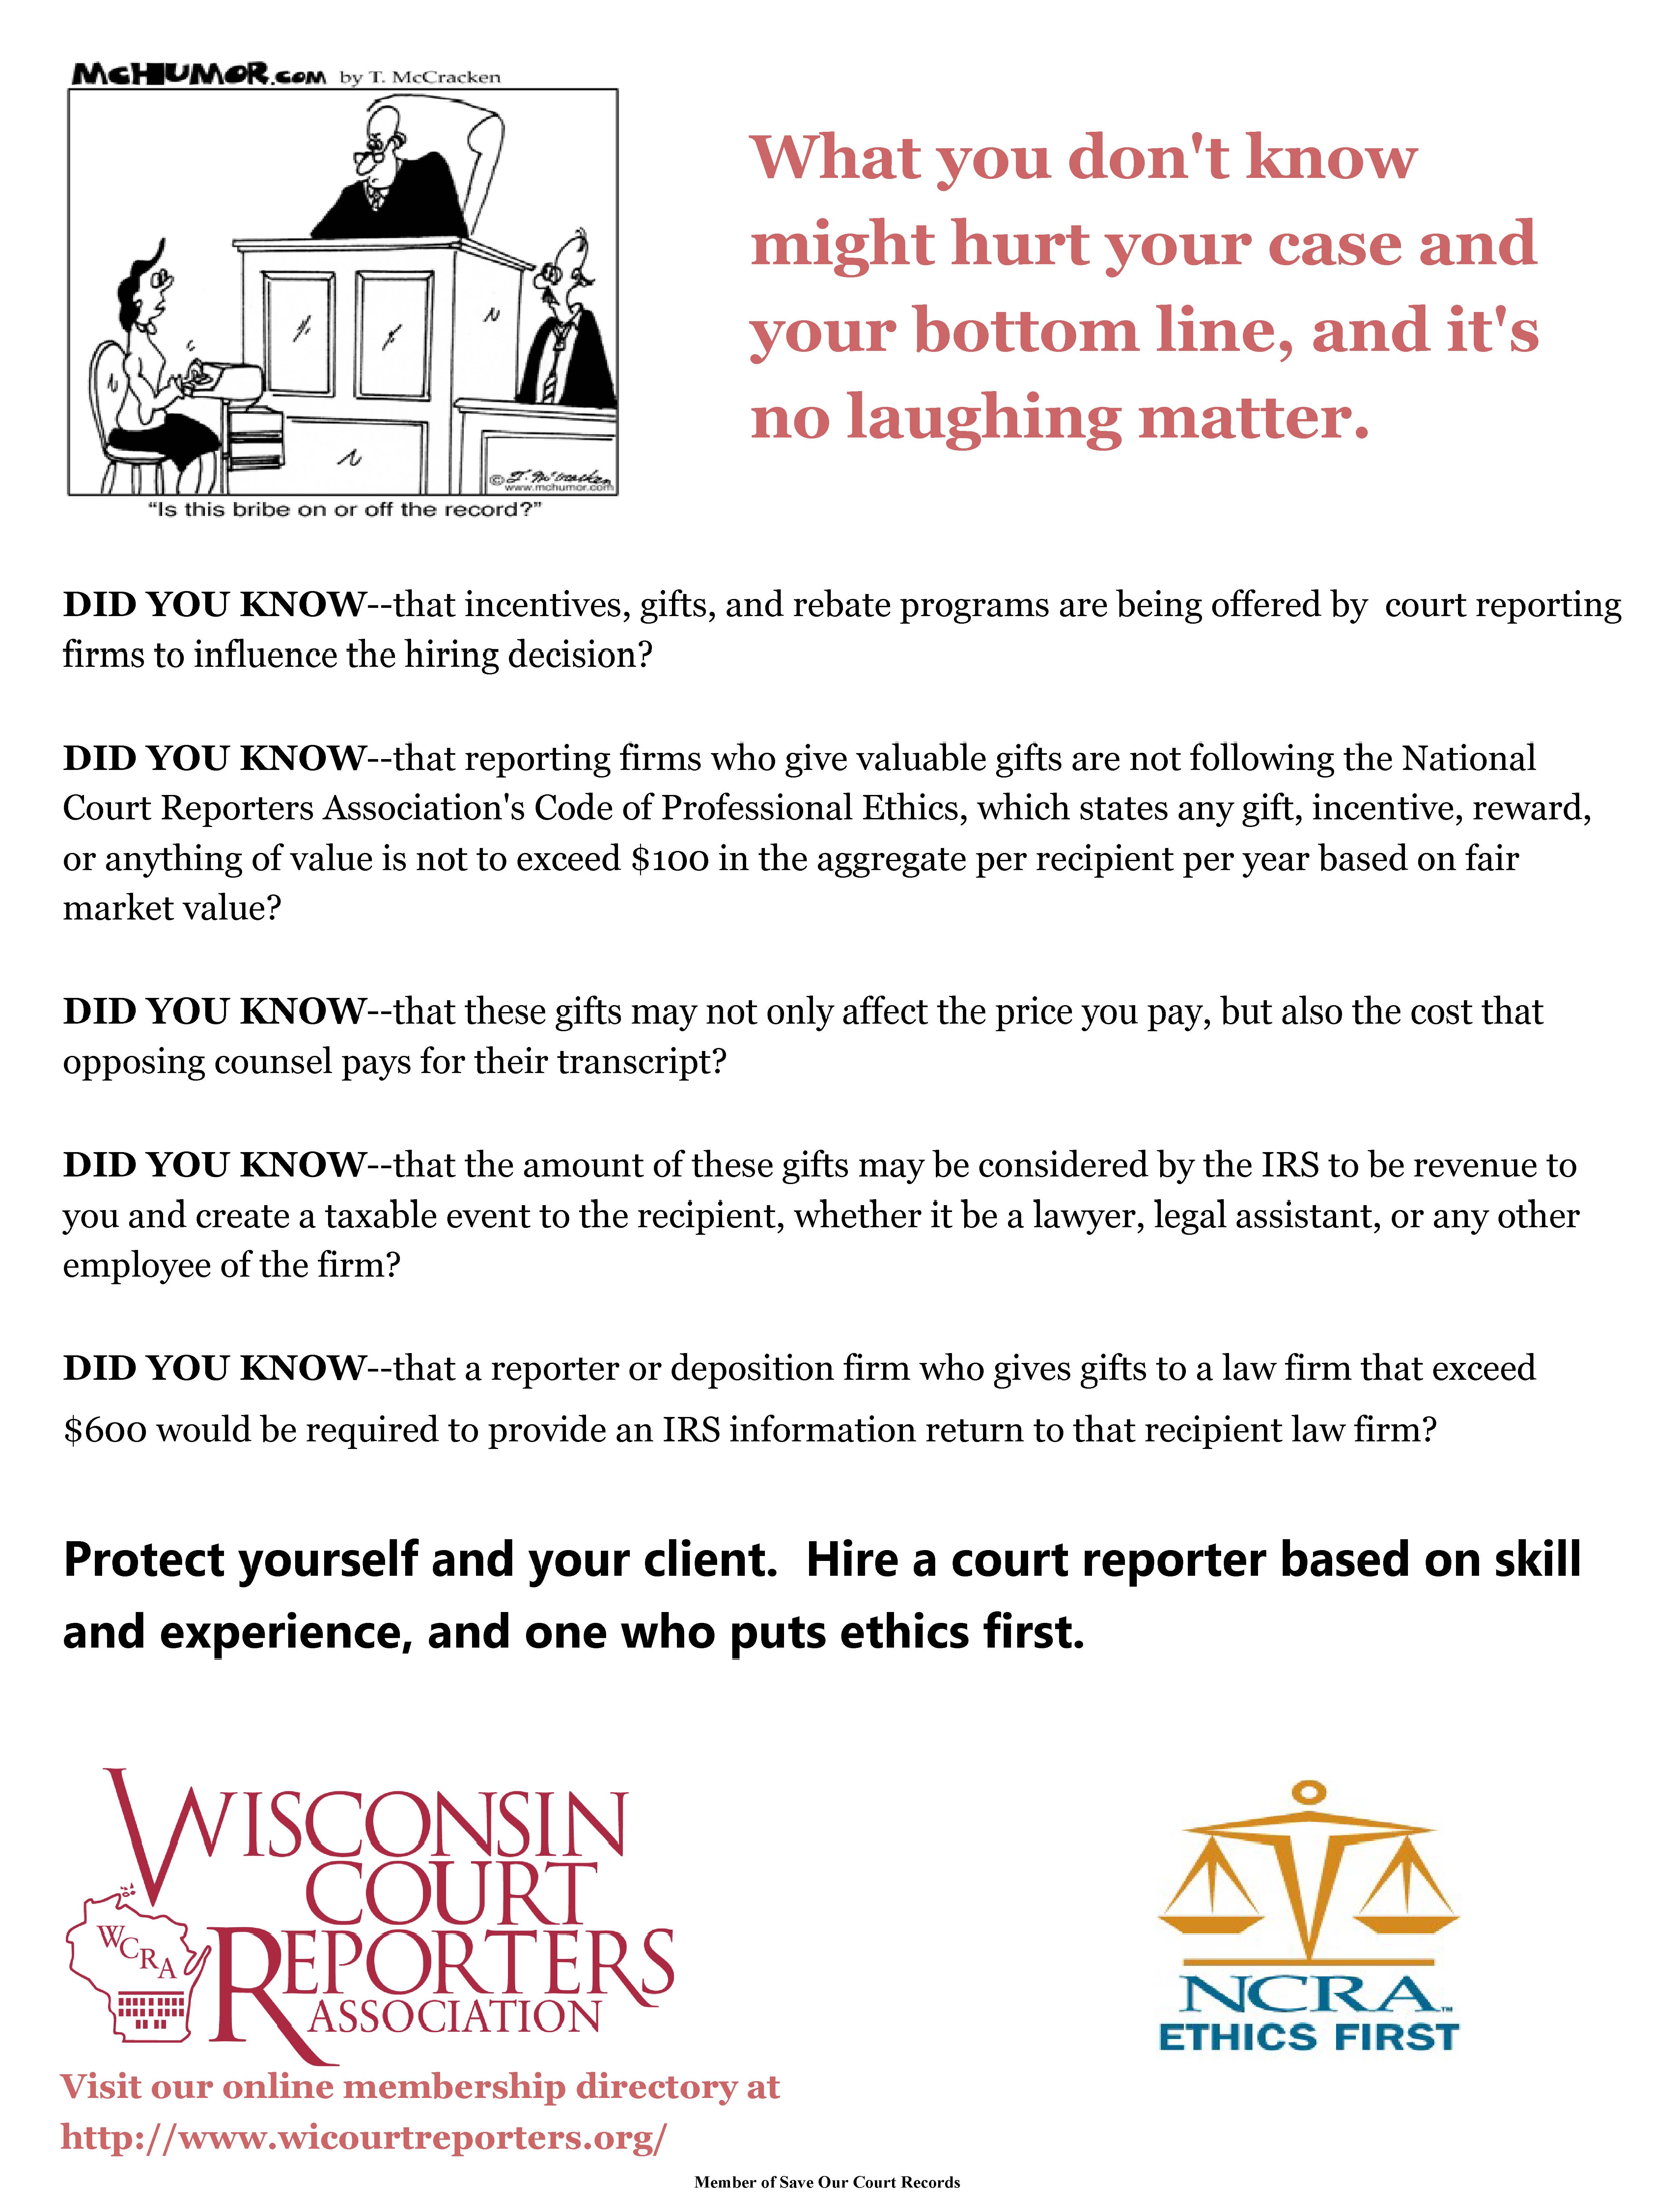 Ethics First with Cartoon--Wisconsin.jpg